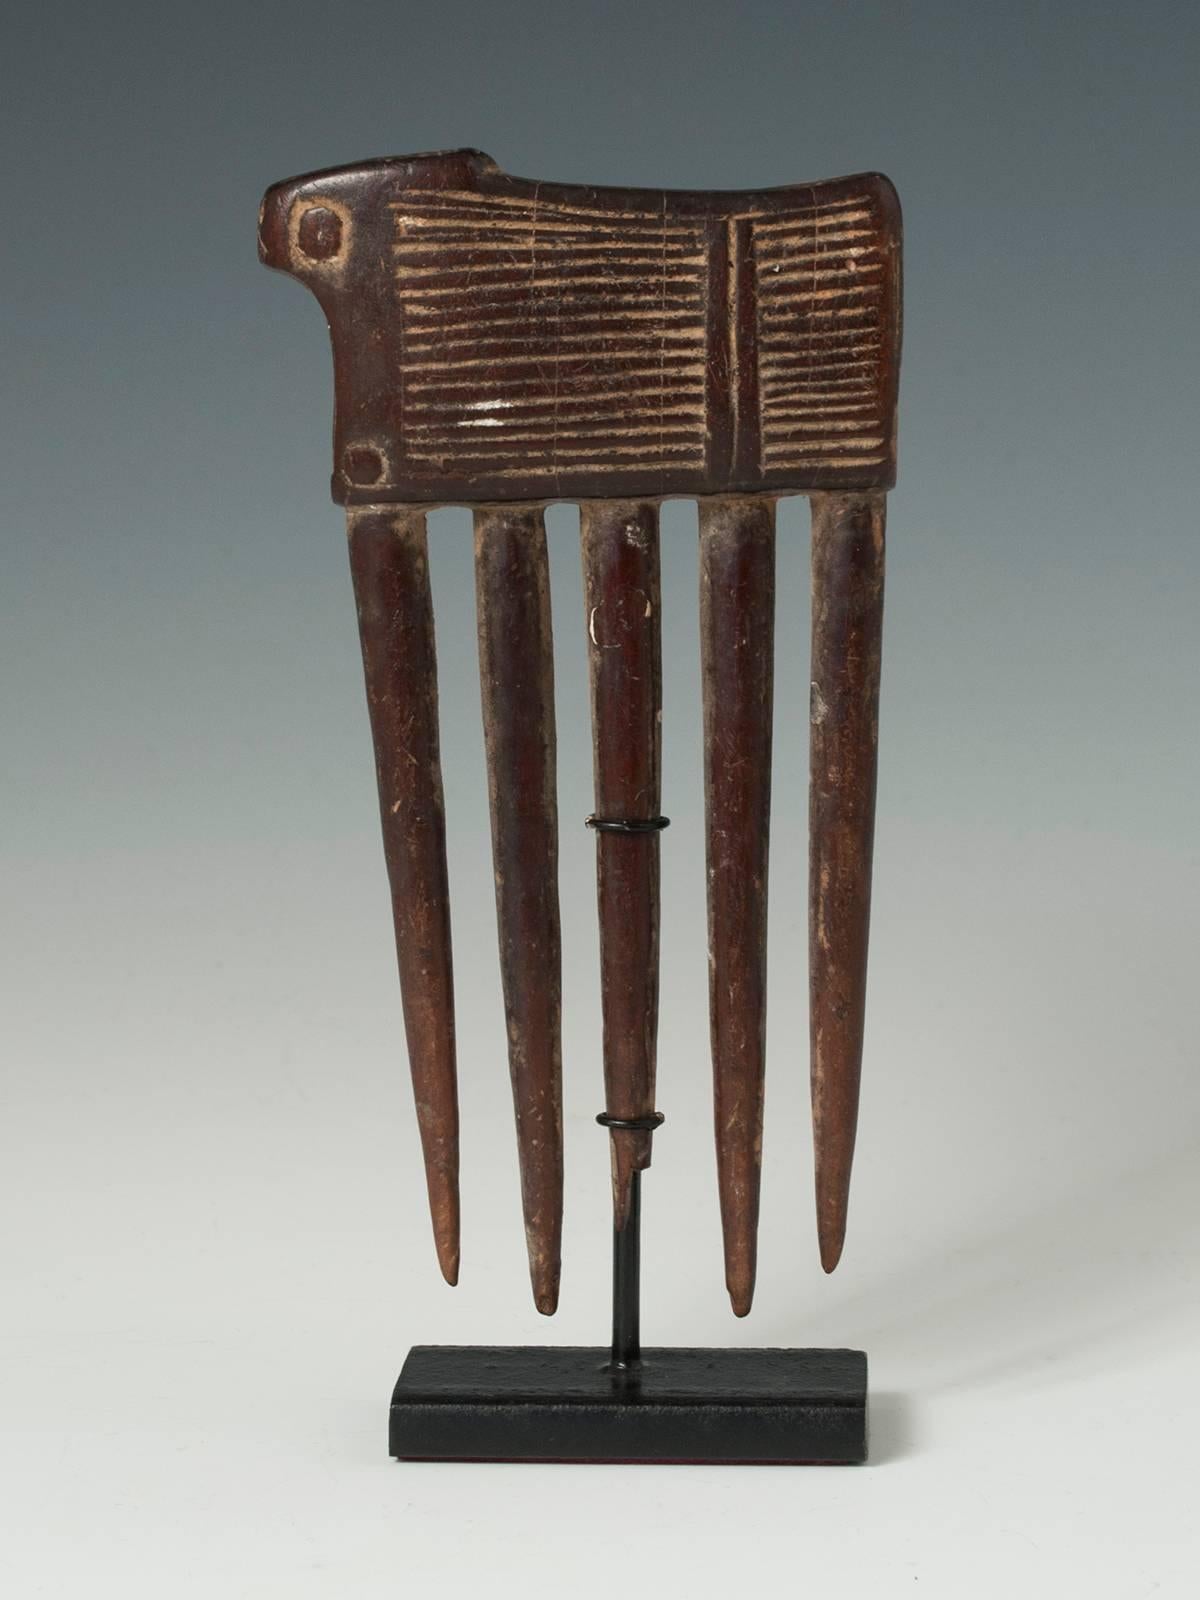 Offered by Zena Kruzick
Mid-20th century tribal African wood comb from the Baule, Cote d'Ivoire

 A charming comb in the shape of a large beast of burden comes mounted on a custom stand.